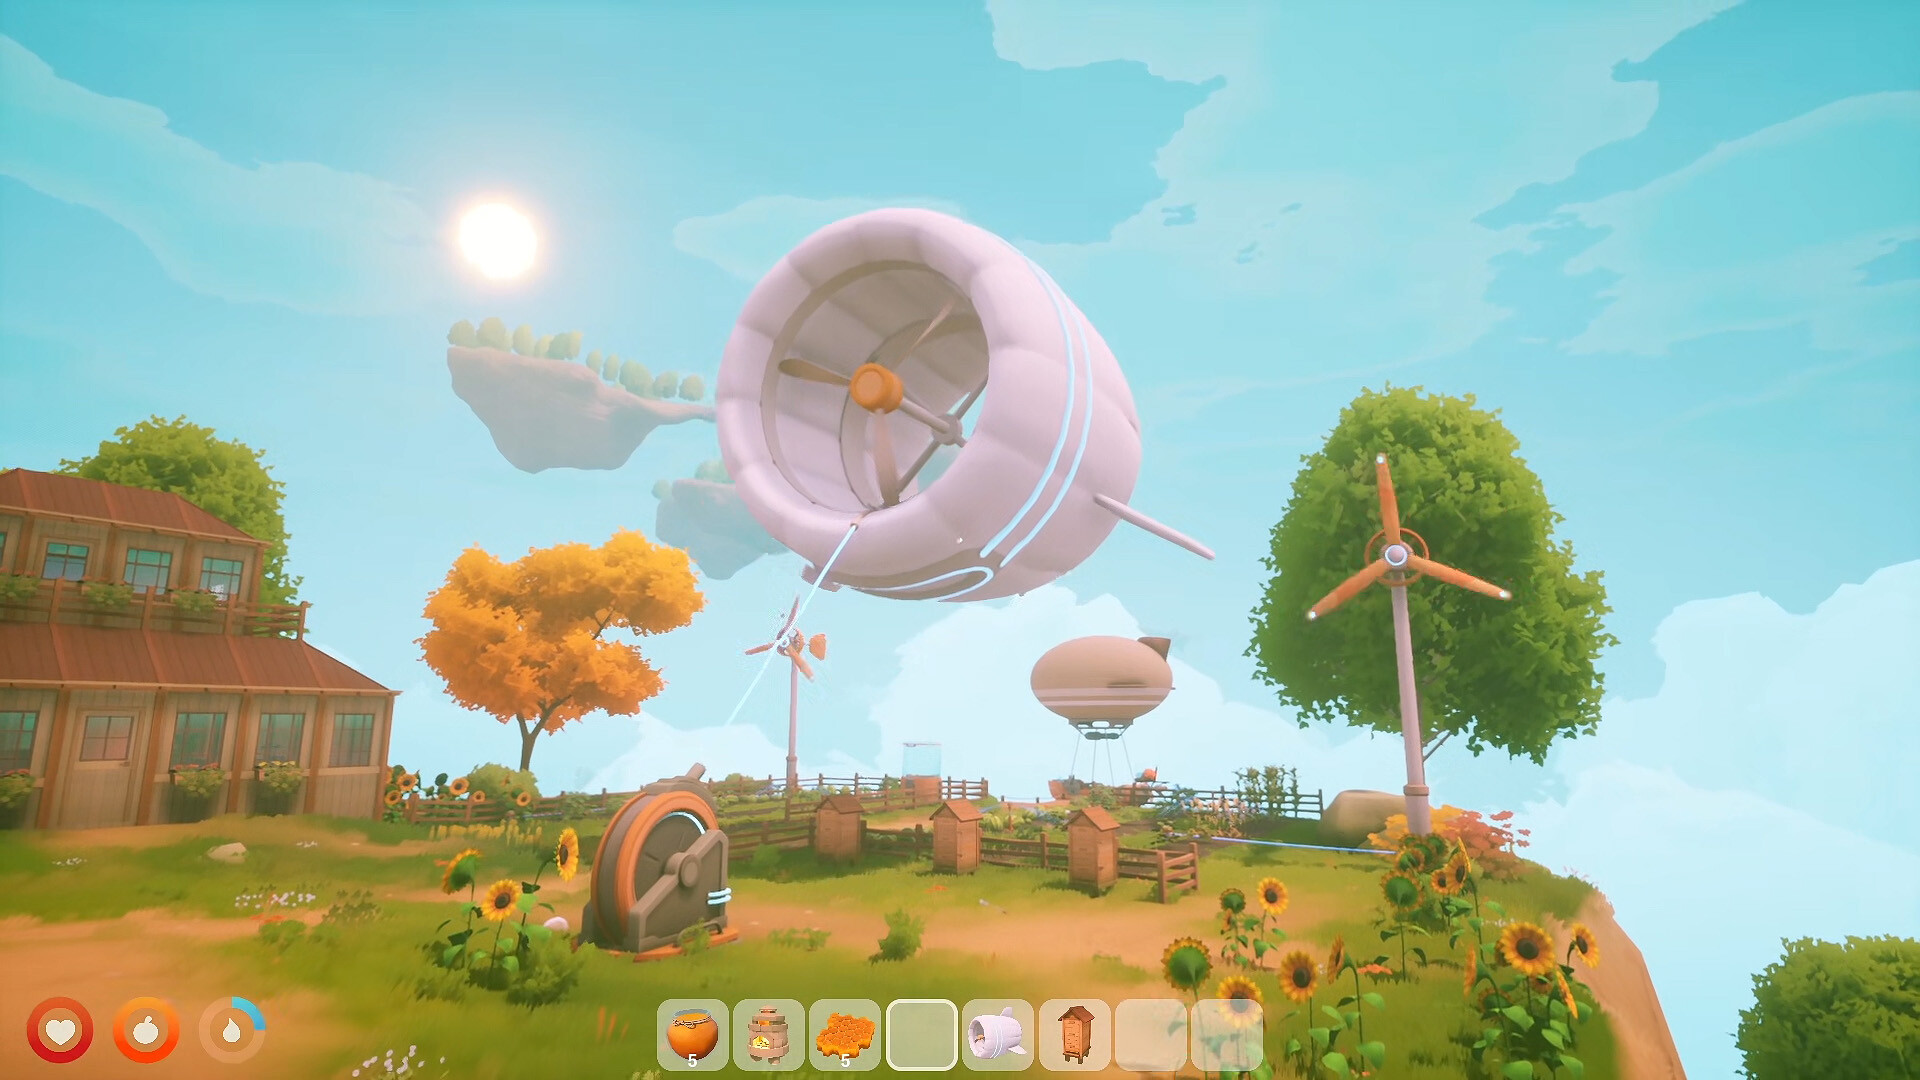 Solarpunk - first person survival craft game for PC/Console by Cyberwave —  Kickstarter